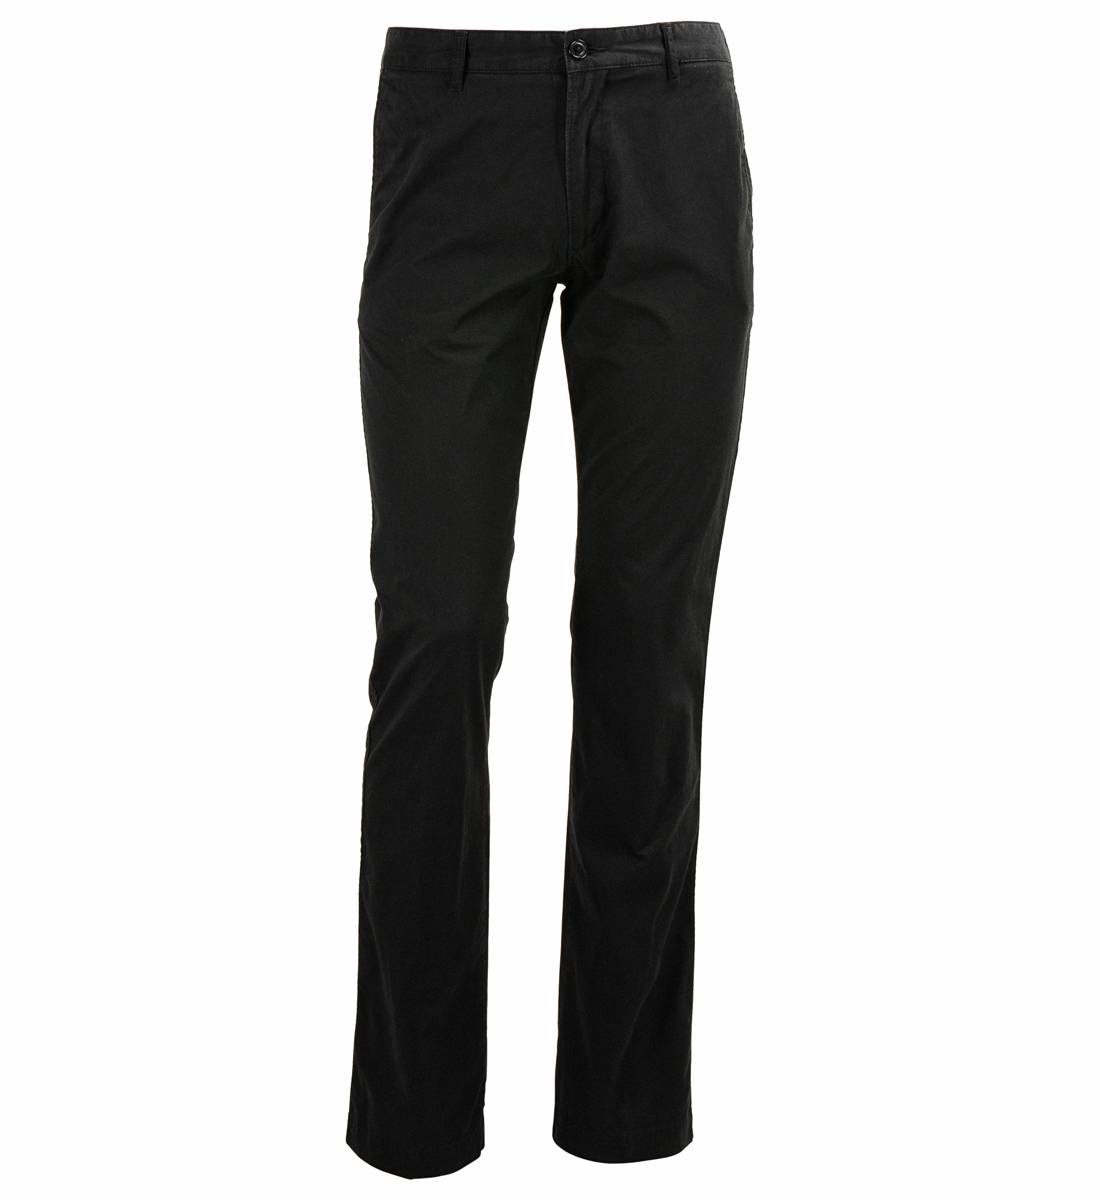 Shop The Latest Collection Of Lacoste Chino Trousers - Hh7165 In Lebanon